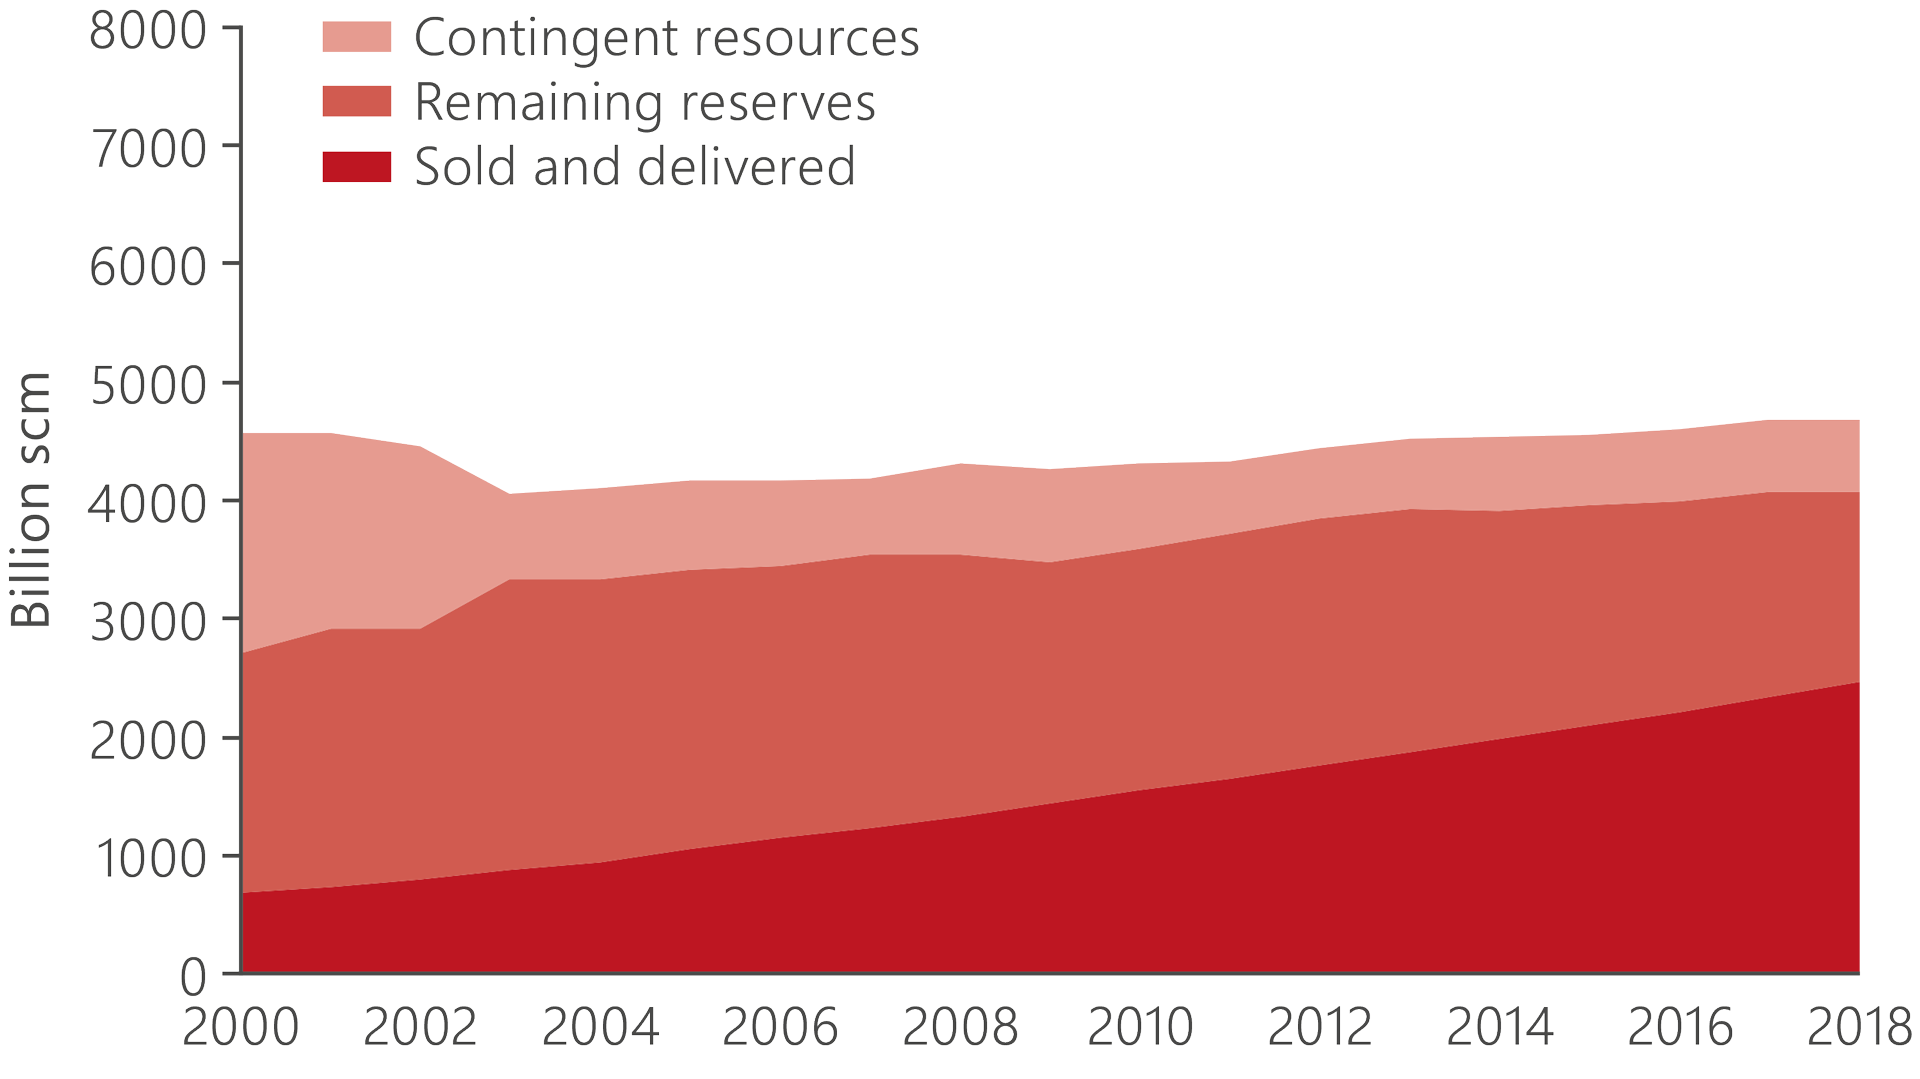 Chart showing distribution of oil sold and delivered, remaining oil reserve and contingent oil resources. 